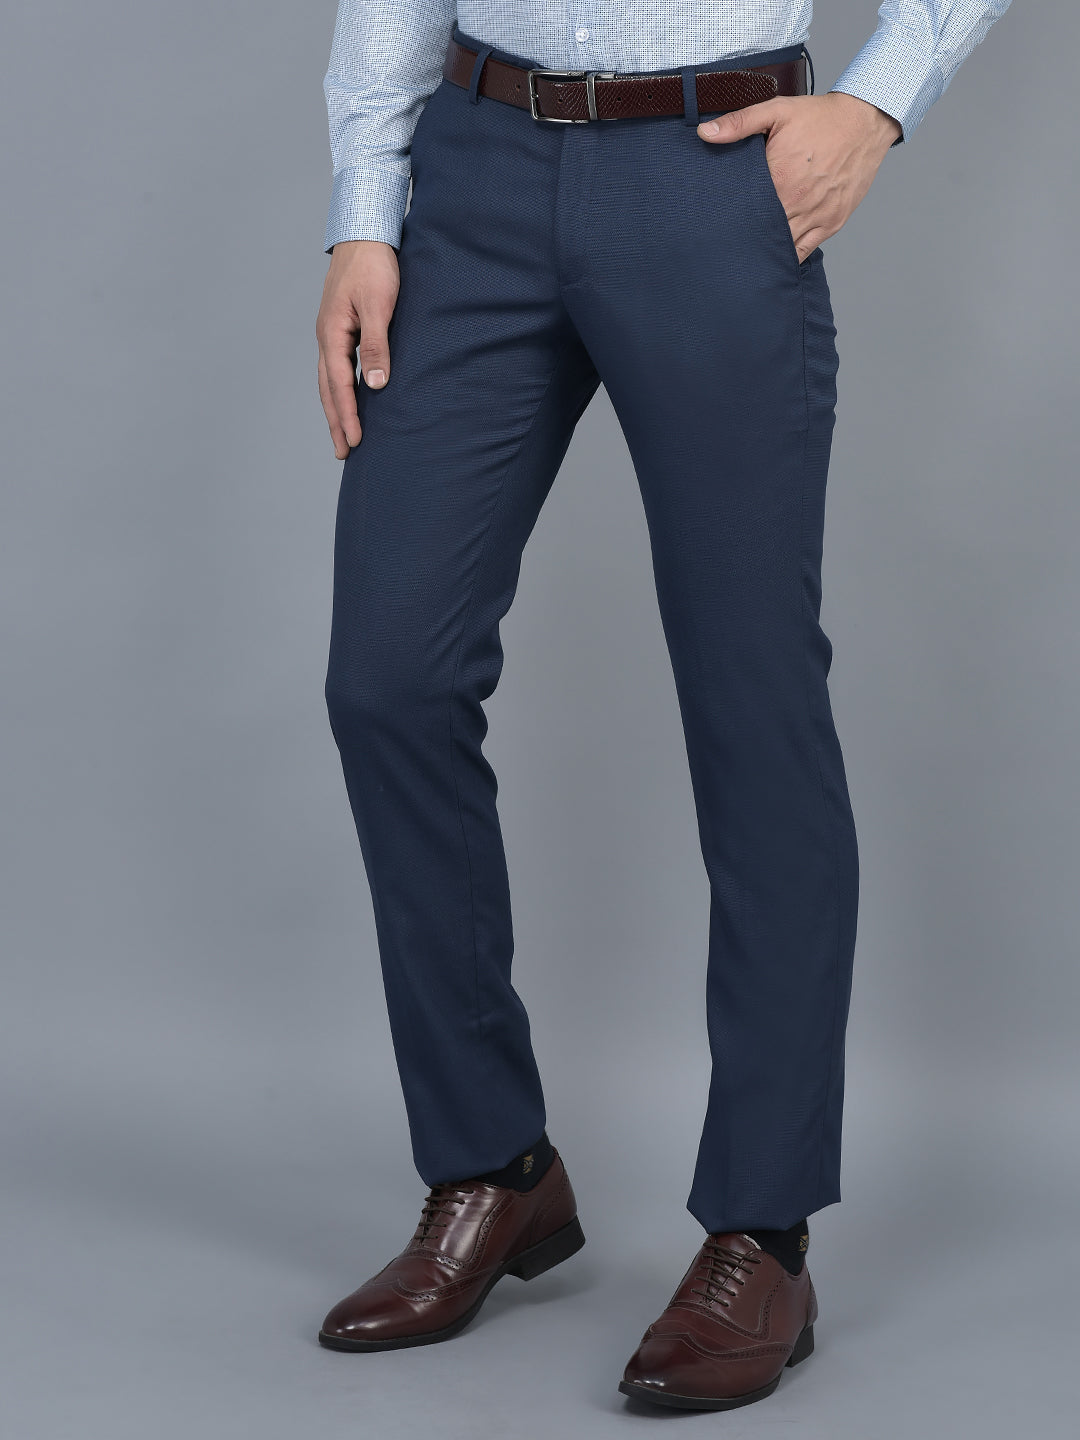 Solid Mid-Rise Stretchable Men's Formal Trouser - Pista